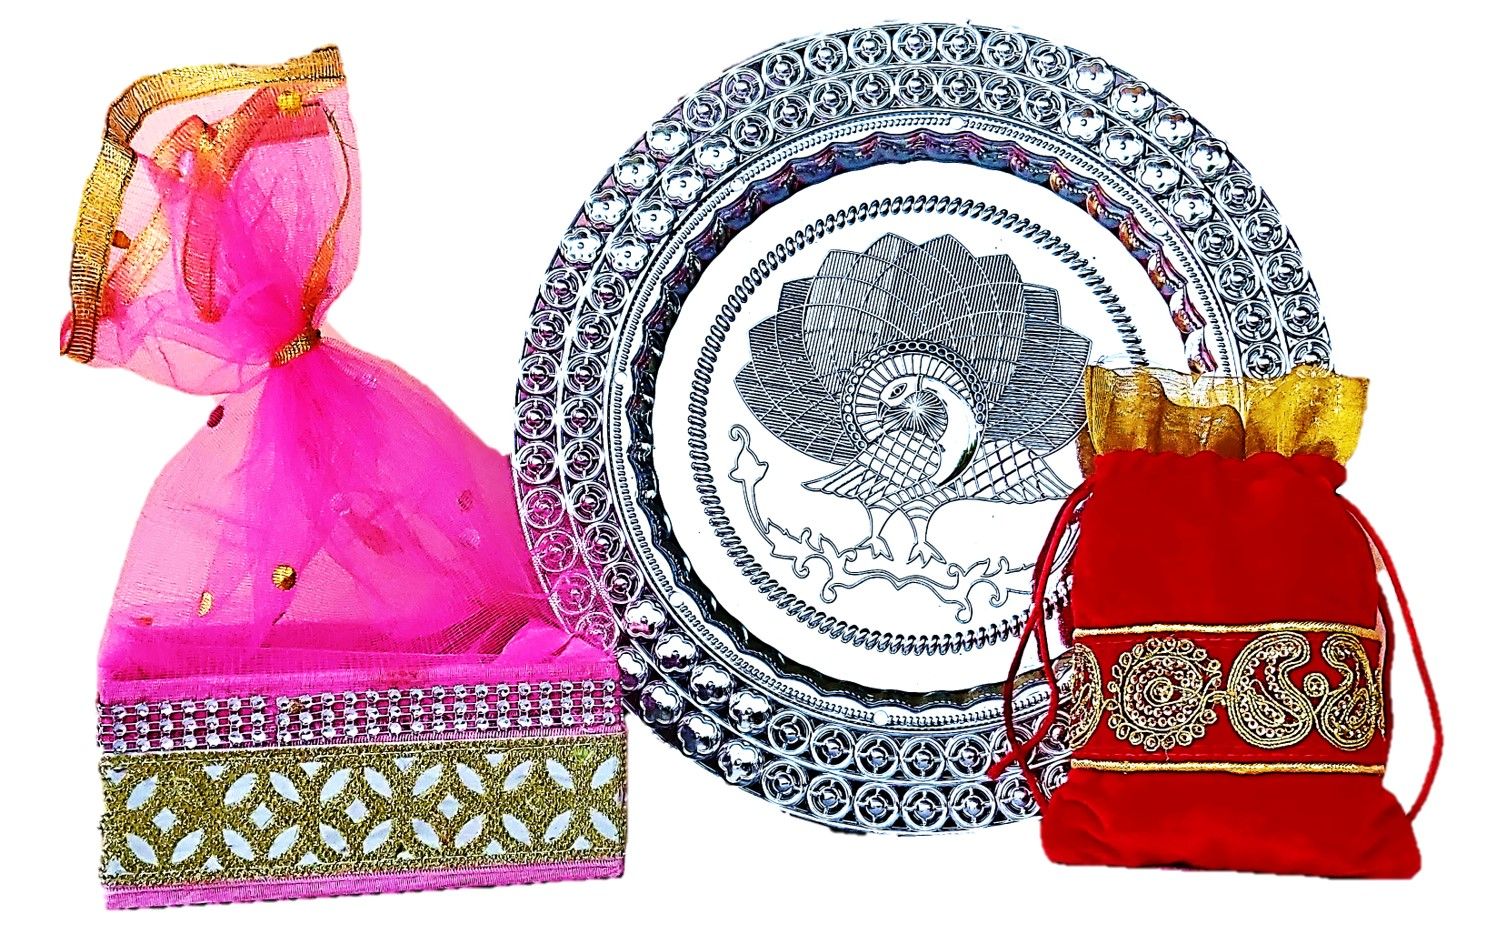 Wooven basket bowl- Pure silver gift items- Silver Pooja Items for Home, Return  Gift for Navarathri, Wedding and Housewarming | Silver pooja items, Silver  gifts, Silver ornaments